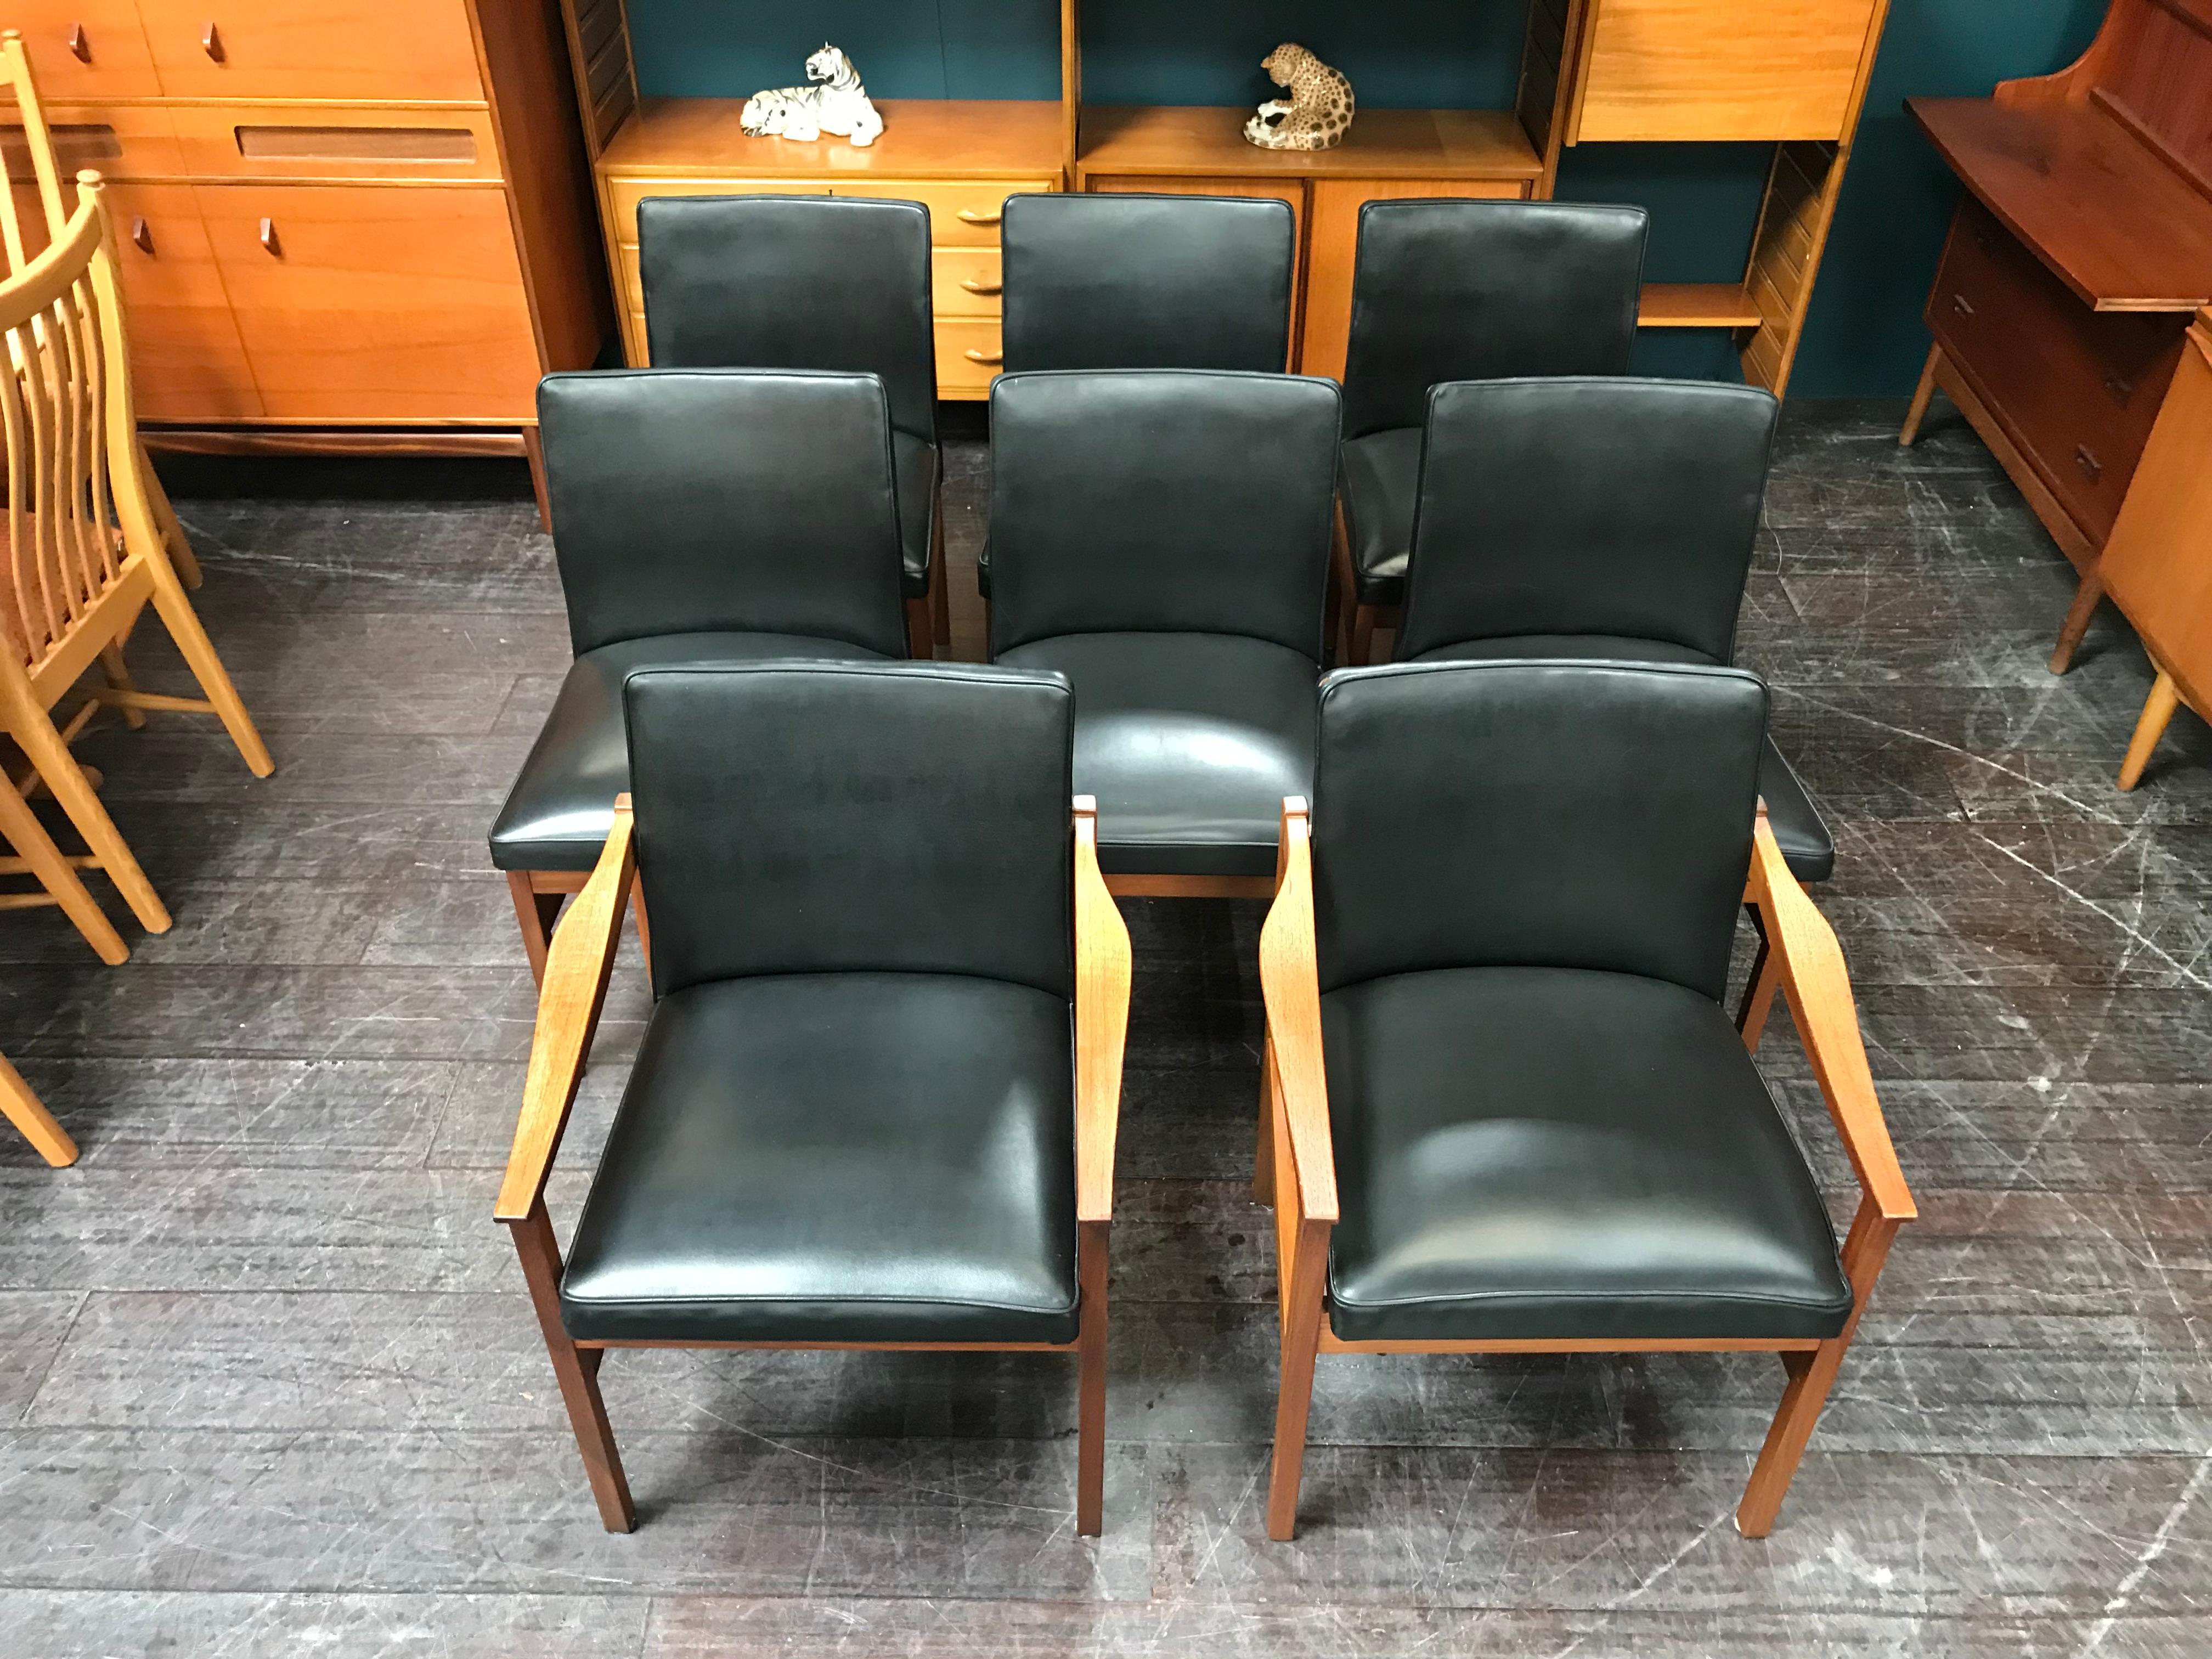 Elegant midcentury Scandinavian dining chairs (including 2 carvers) designed by Nils Jonsson for Swedish maker Troeds. Clean lines are a key attribute of this set and Nils Jonsson has excelled in its design. These are a stunning set of Swedish